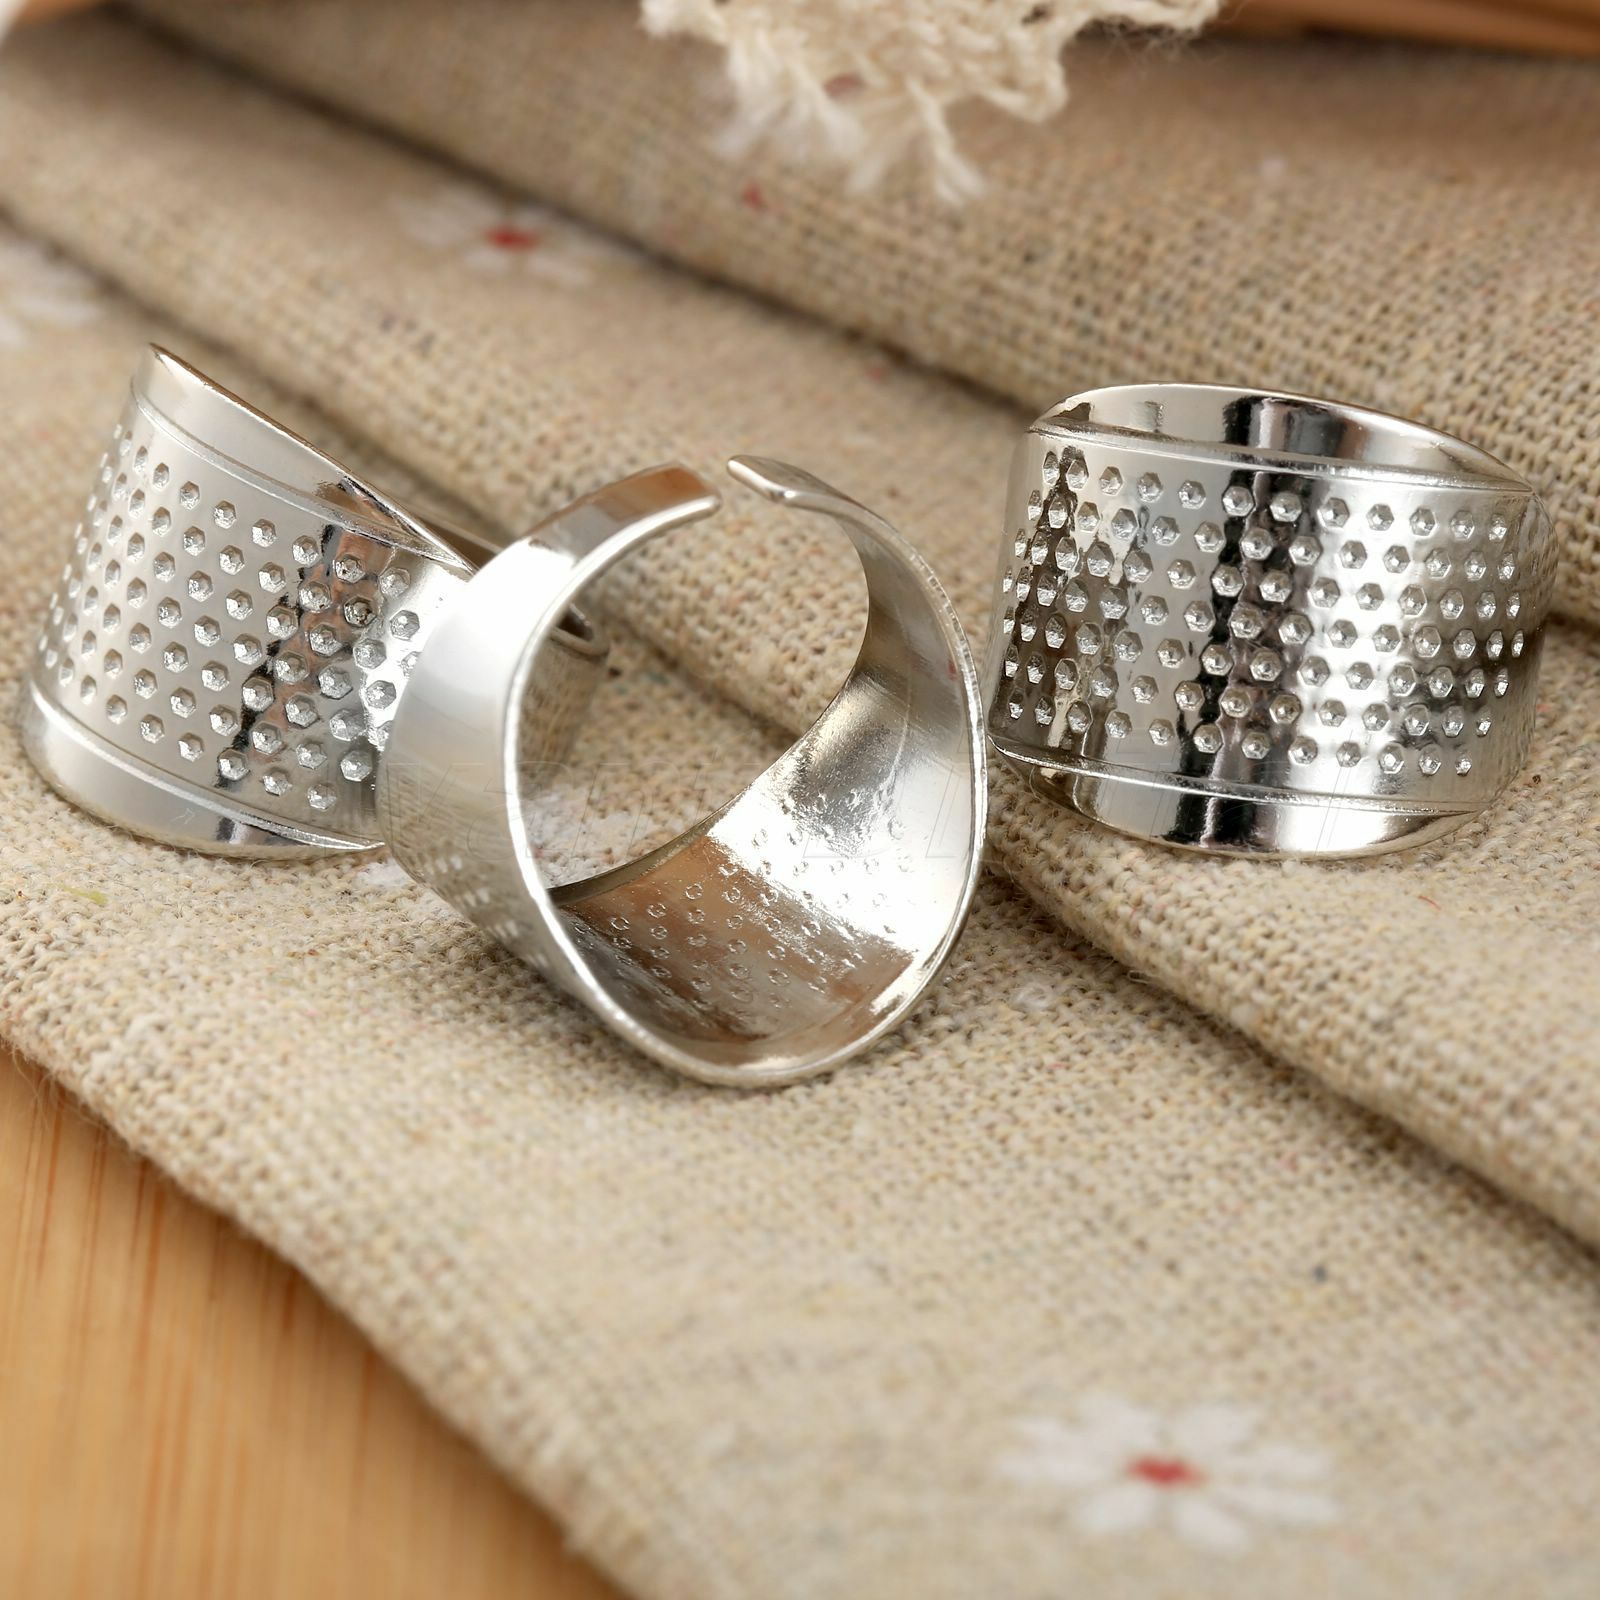 3X Finger Thimbles Adjustable Size Ring Thimble Sewing Tool Handmade Stitch Tool